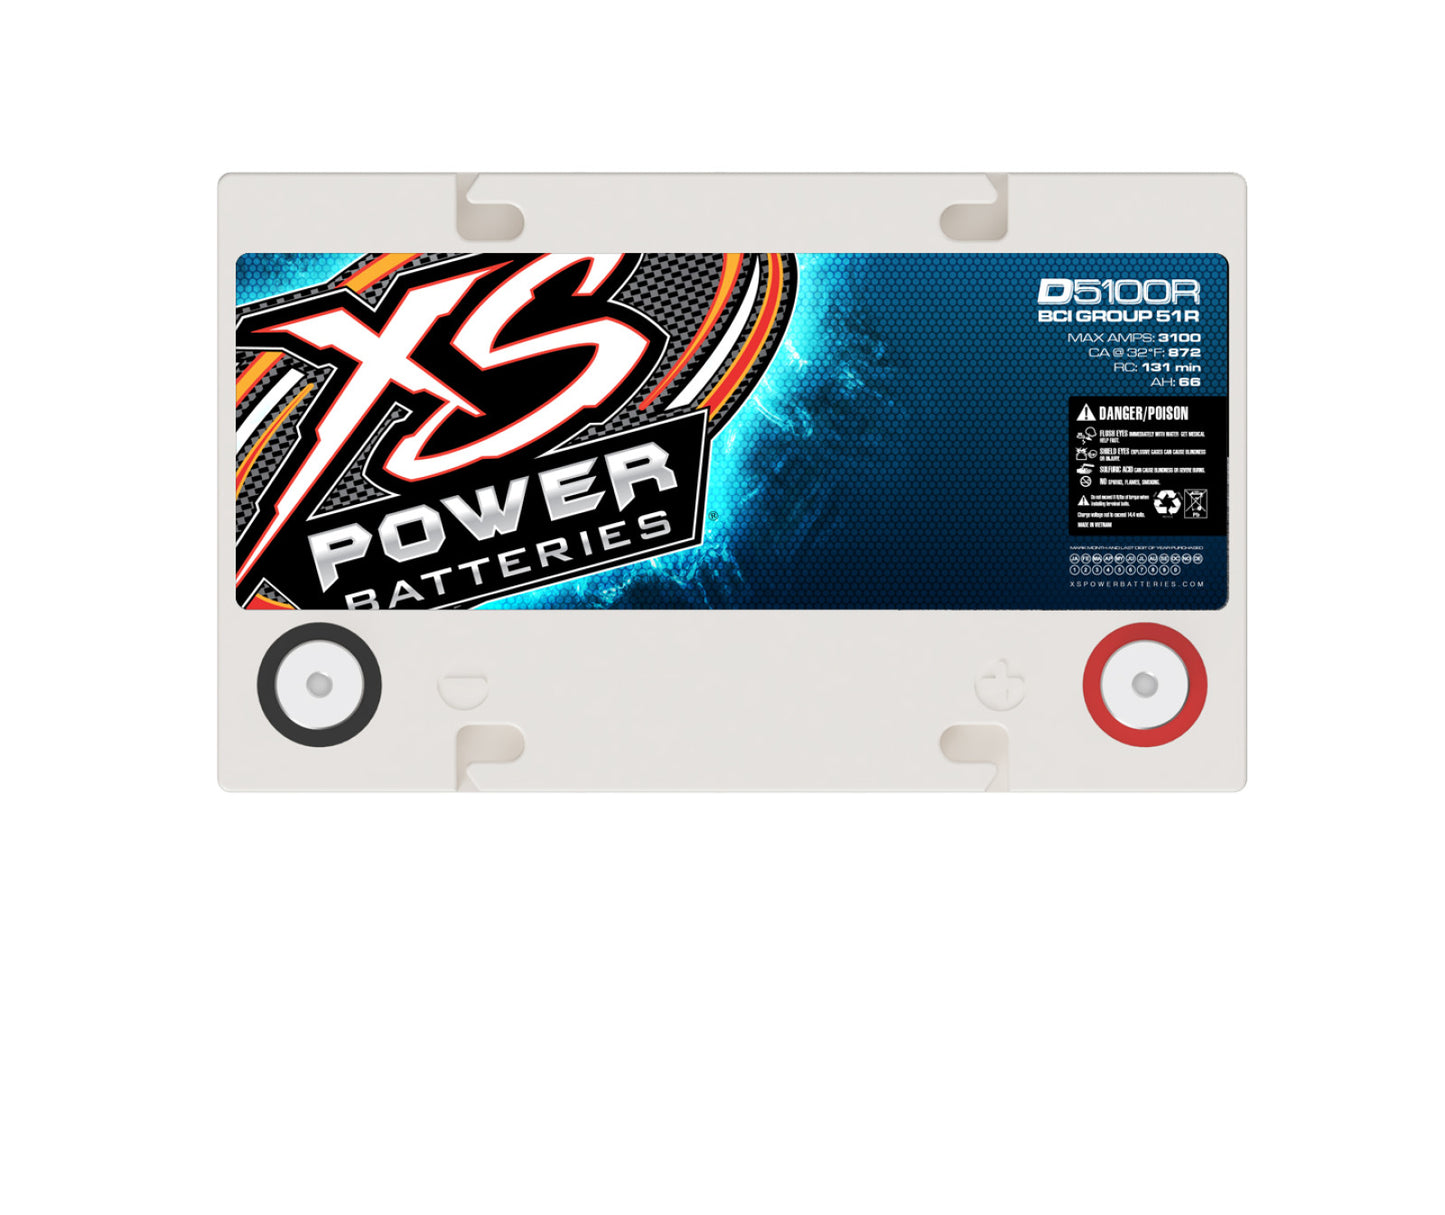 XS Power Batteries 12V AGM D Series Batteries - M6 Terminal Bolts Included 3100 Max Amps